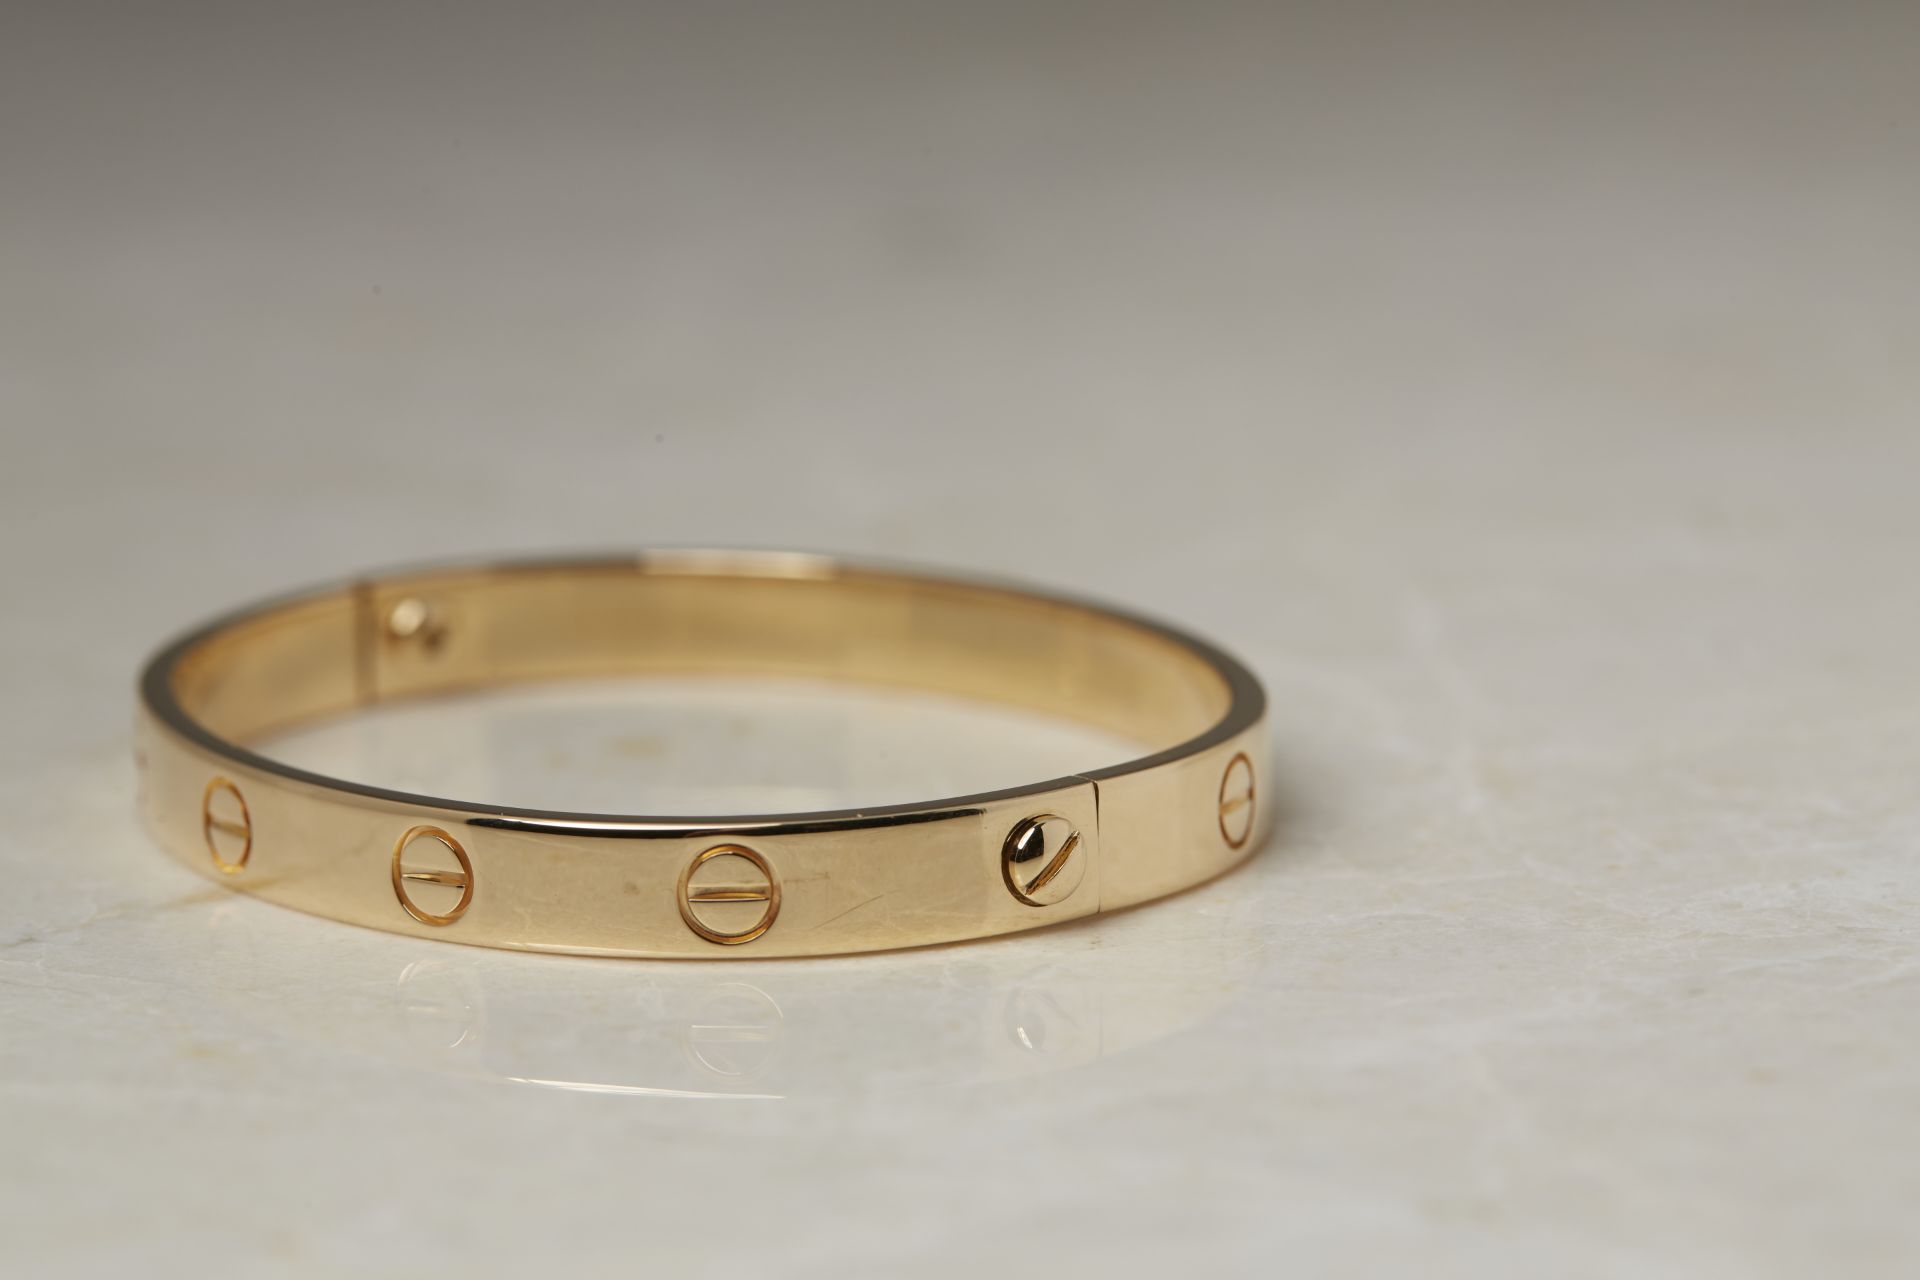 Cartier 18k Yellow Gold Love Bangle - Image 4 of 8